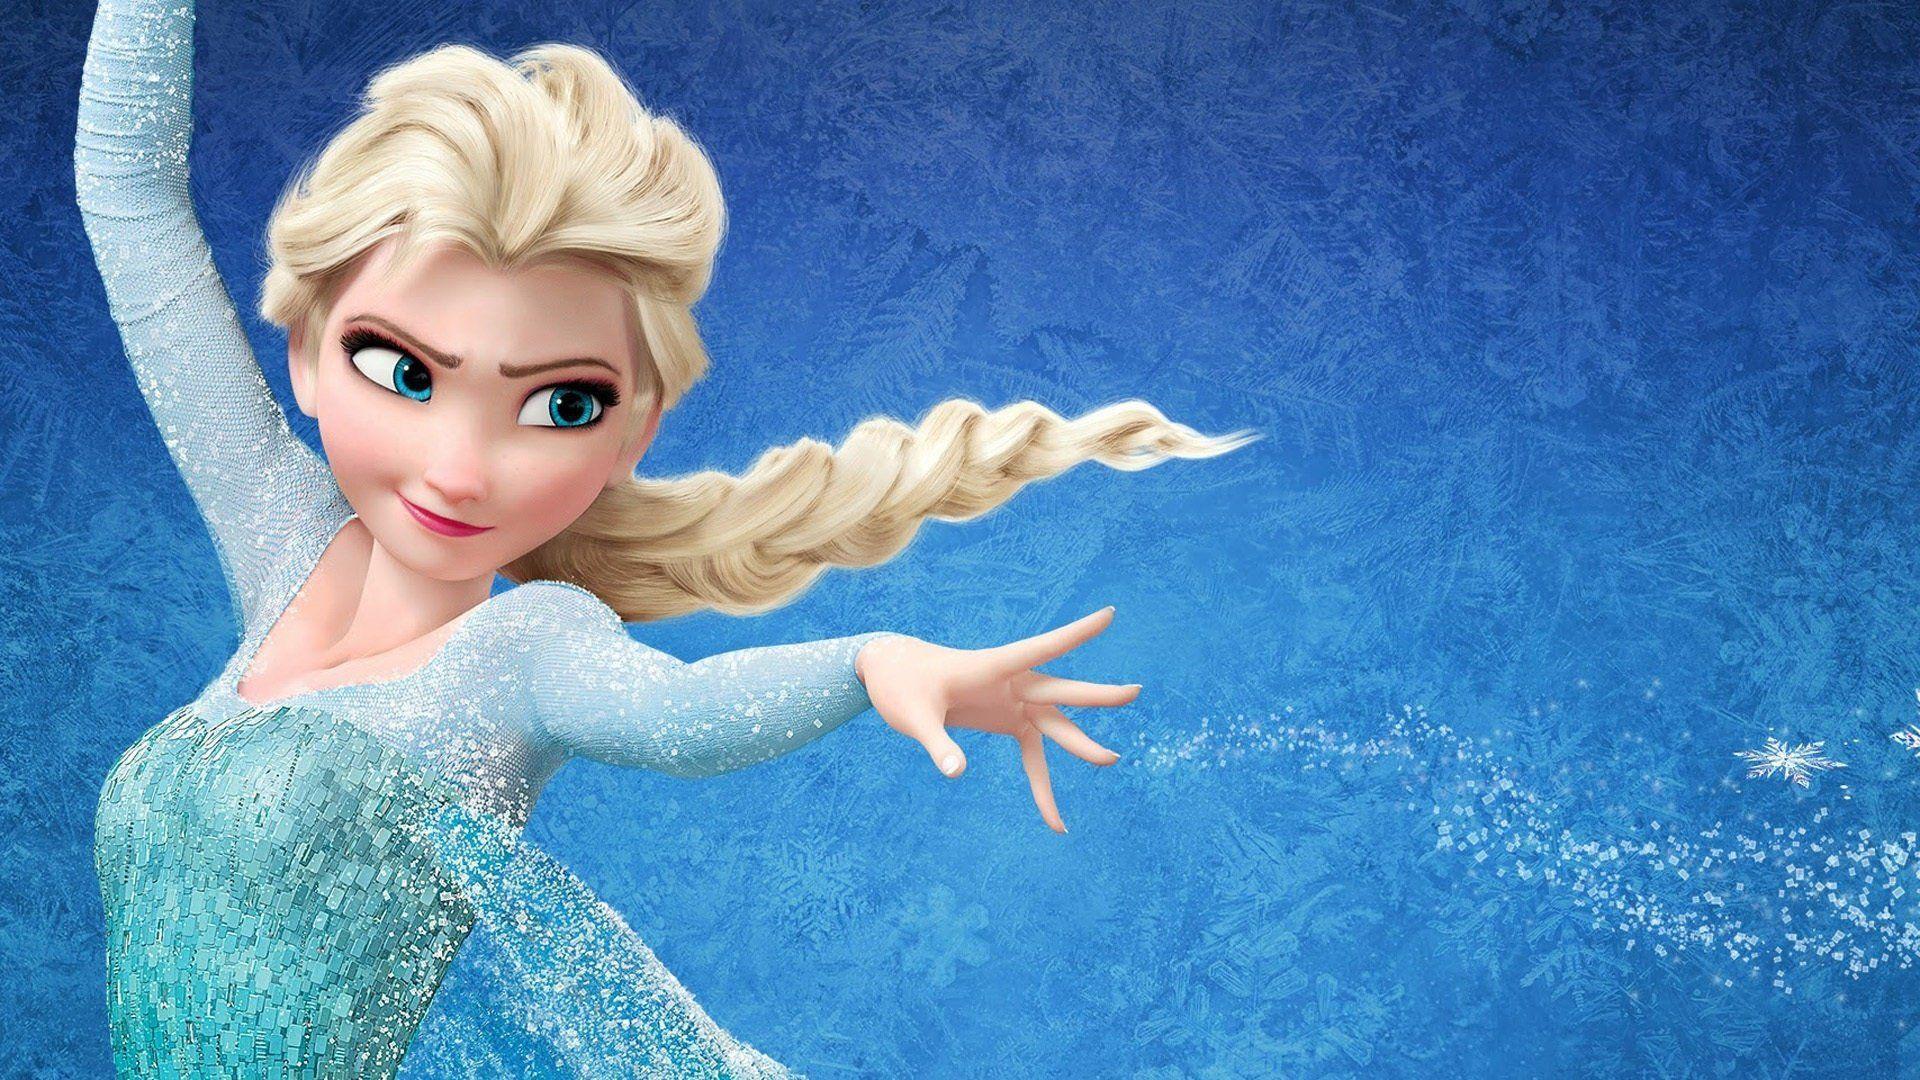 Images, Wallpaper of Elsa in HD Quality: BsnSCB Gallery